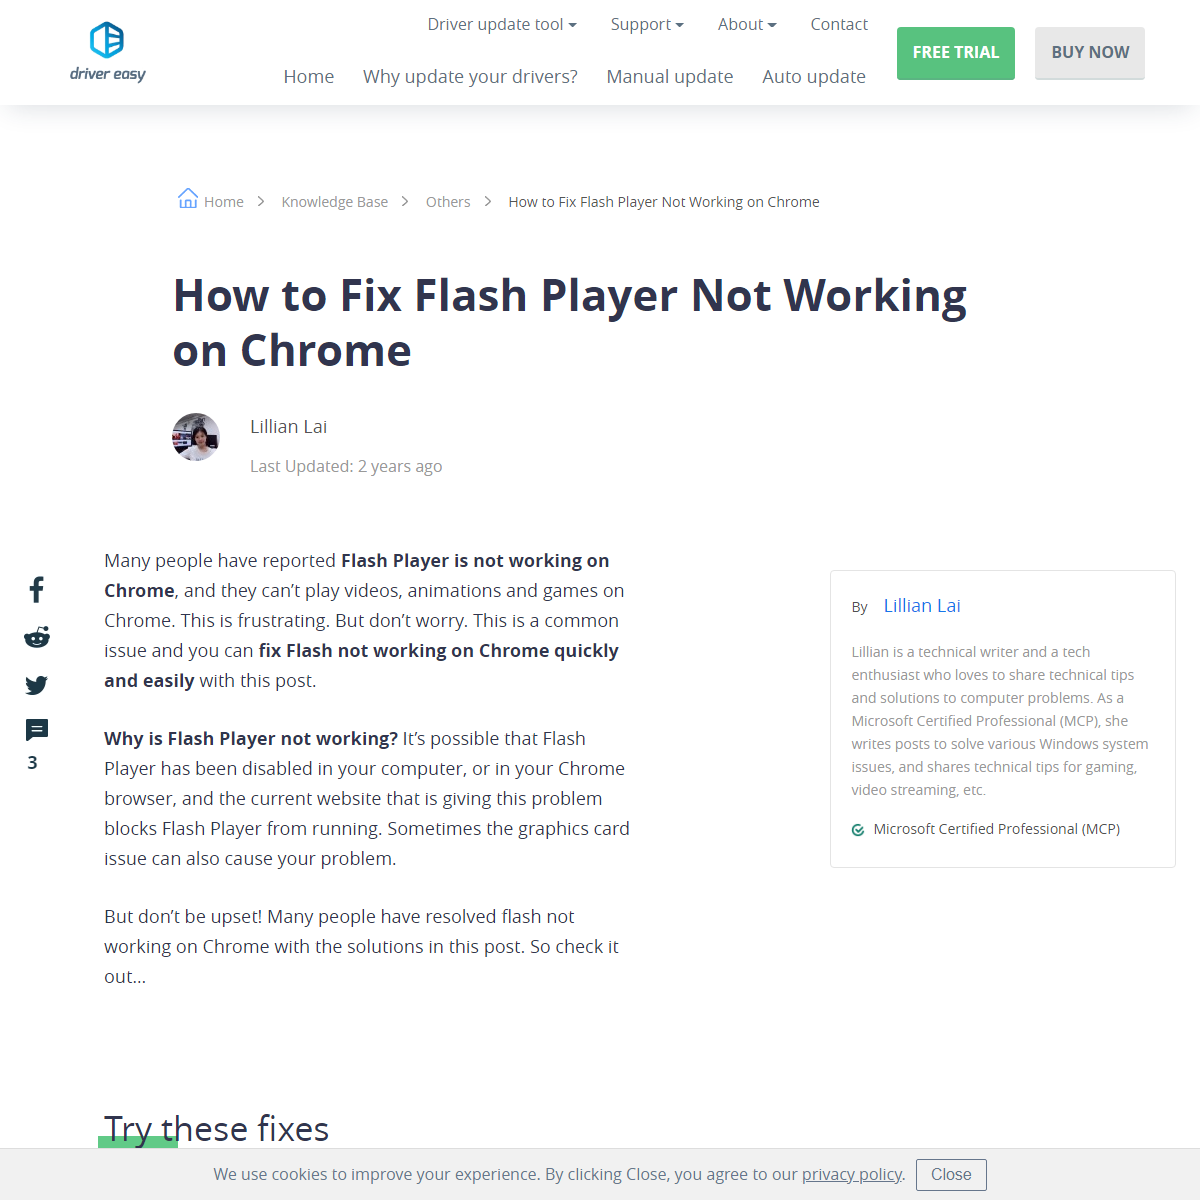 A complete backup of https://www.drivereasy.com/knowledge/how-to-fix-flash-player-not-working-on-chrome/